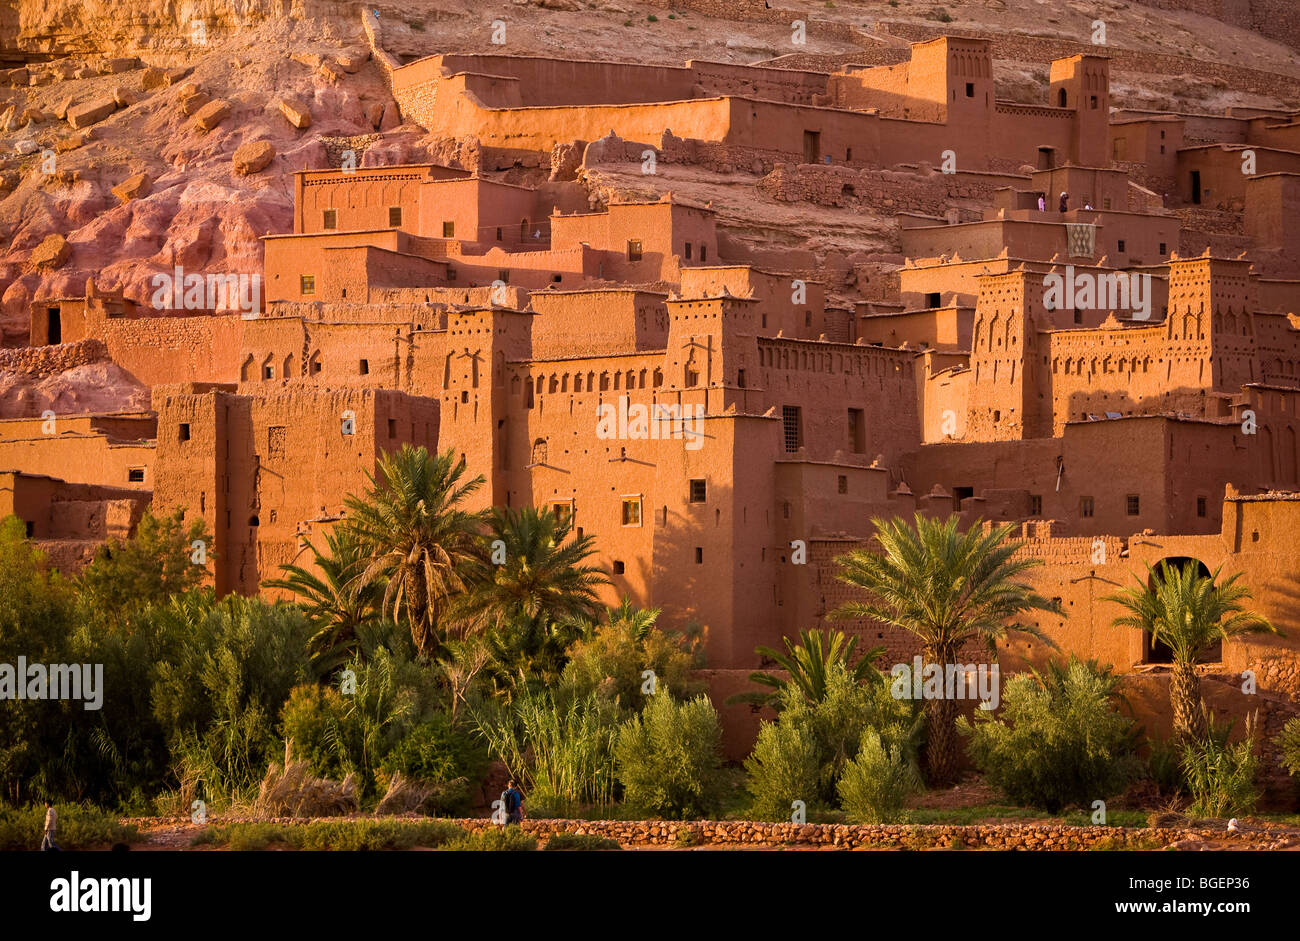 OUARZAZATE PROVINCE, MOROCCO - Ksar at Ait Benhaddou. This fortified mudbrick kasbah is a UNESCO World Heritage Site. Stock Photo